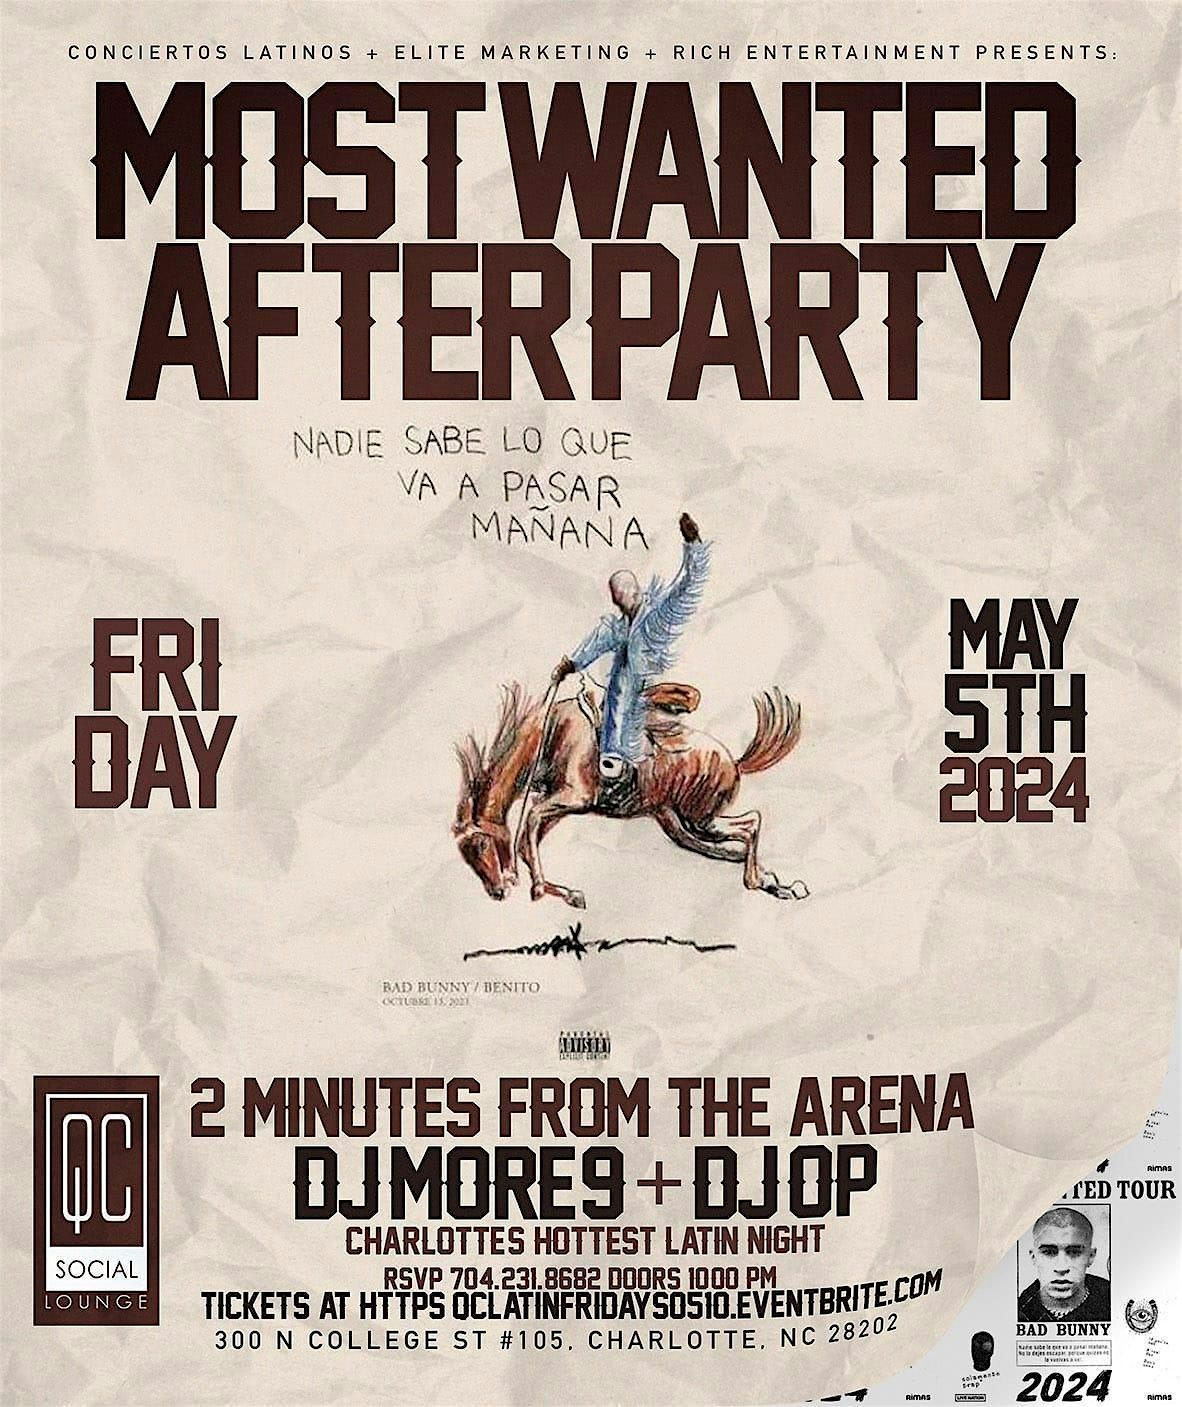 THE MOST WANTED AFTER PARTY at QC SOCIAL\u203c\ufe0f